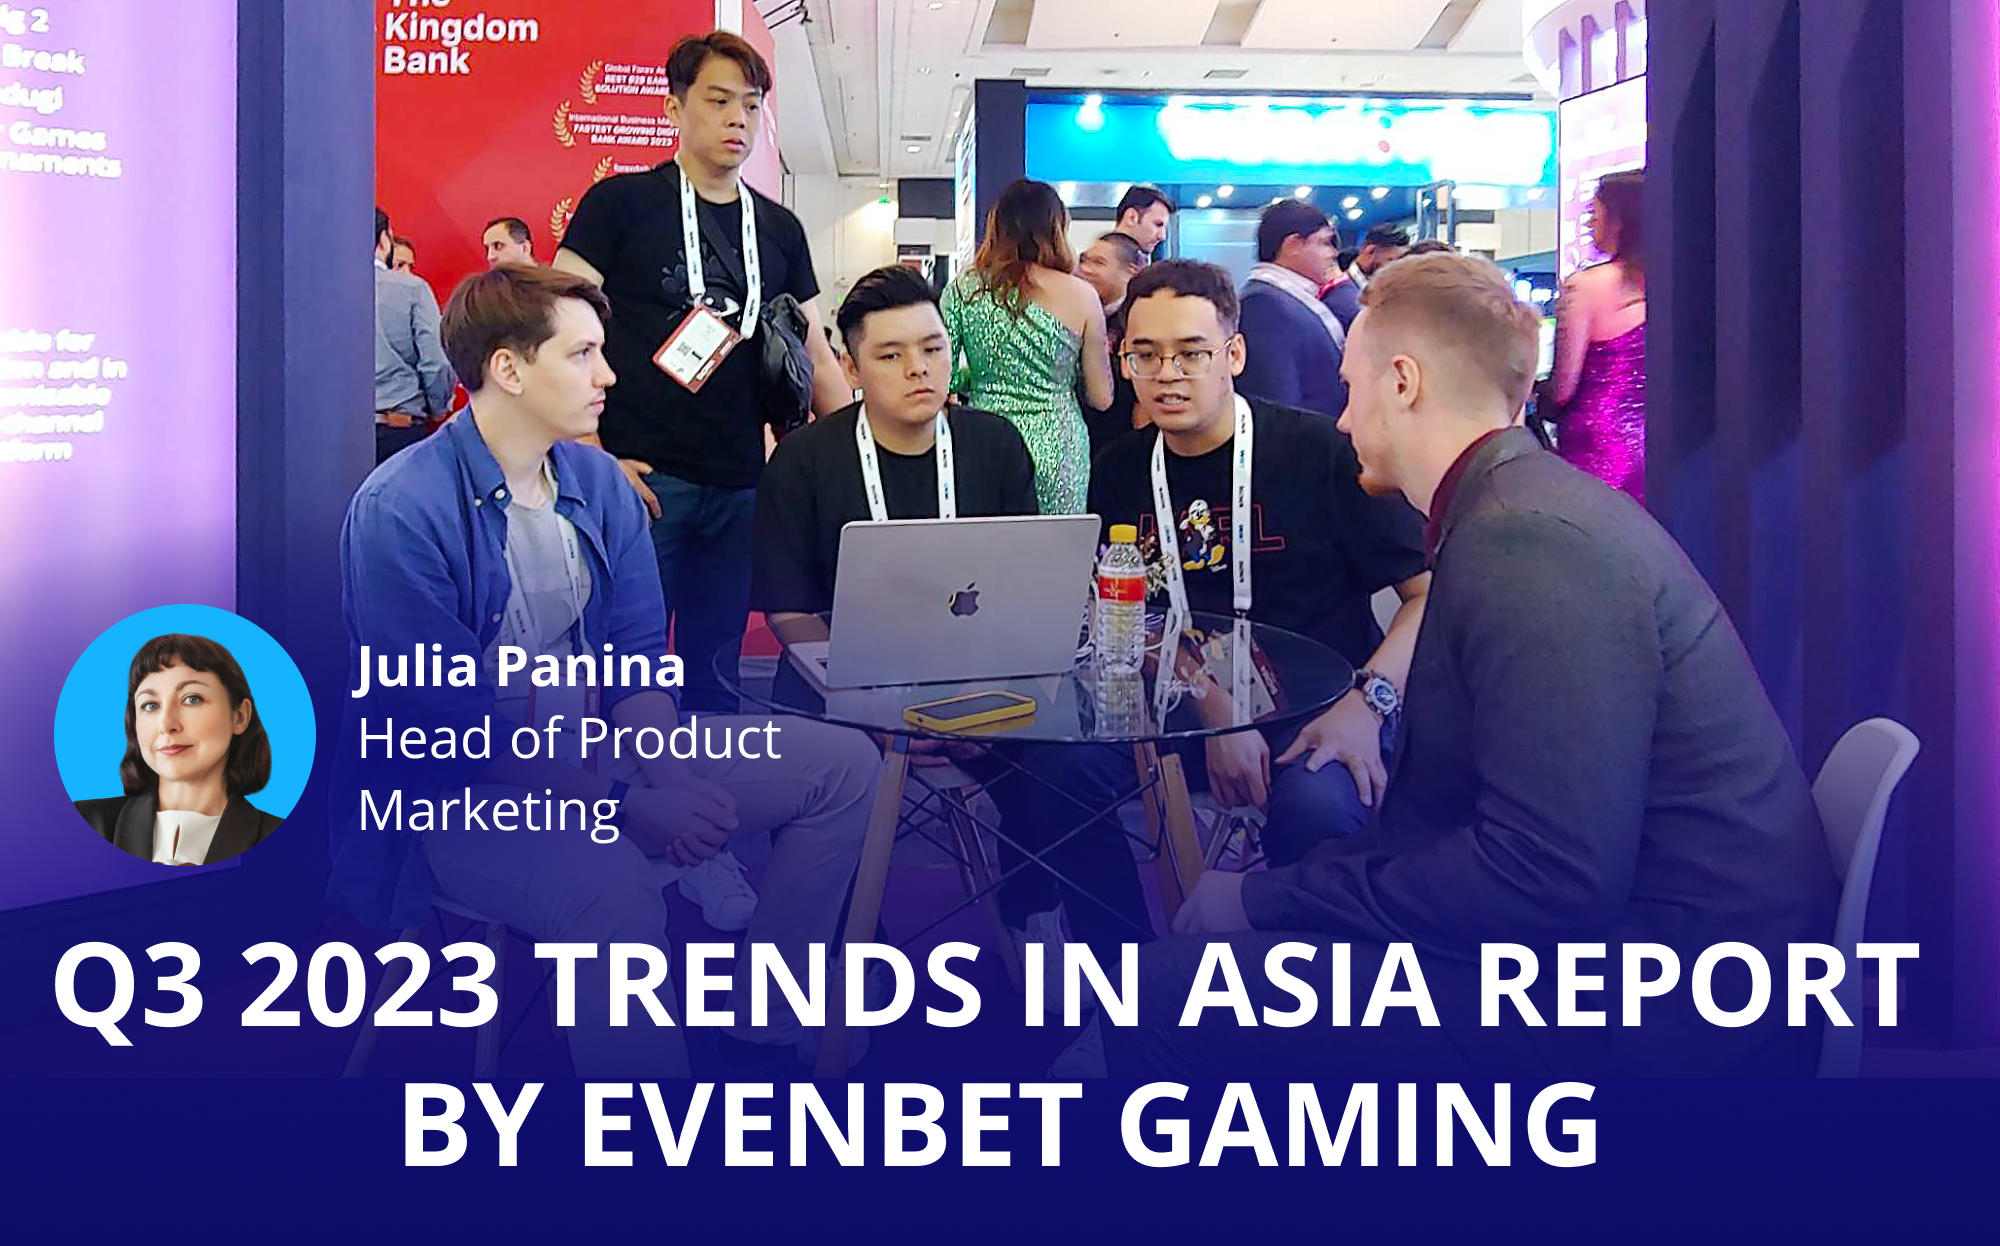 Q3 2023 iGaming Trends in Asia